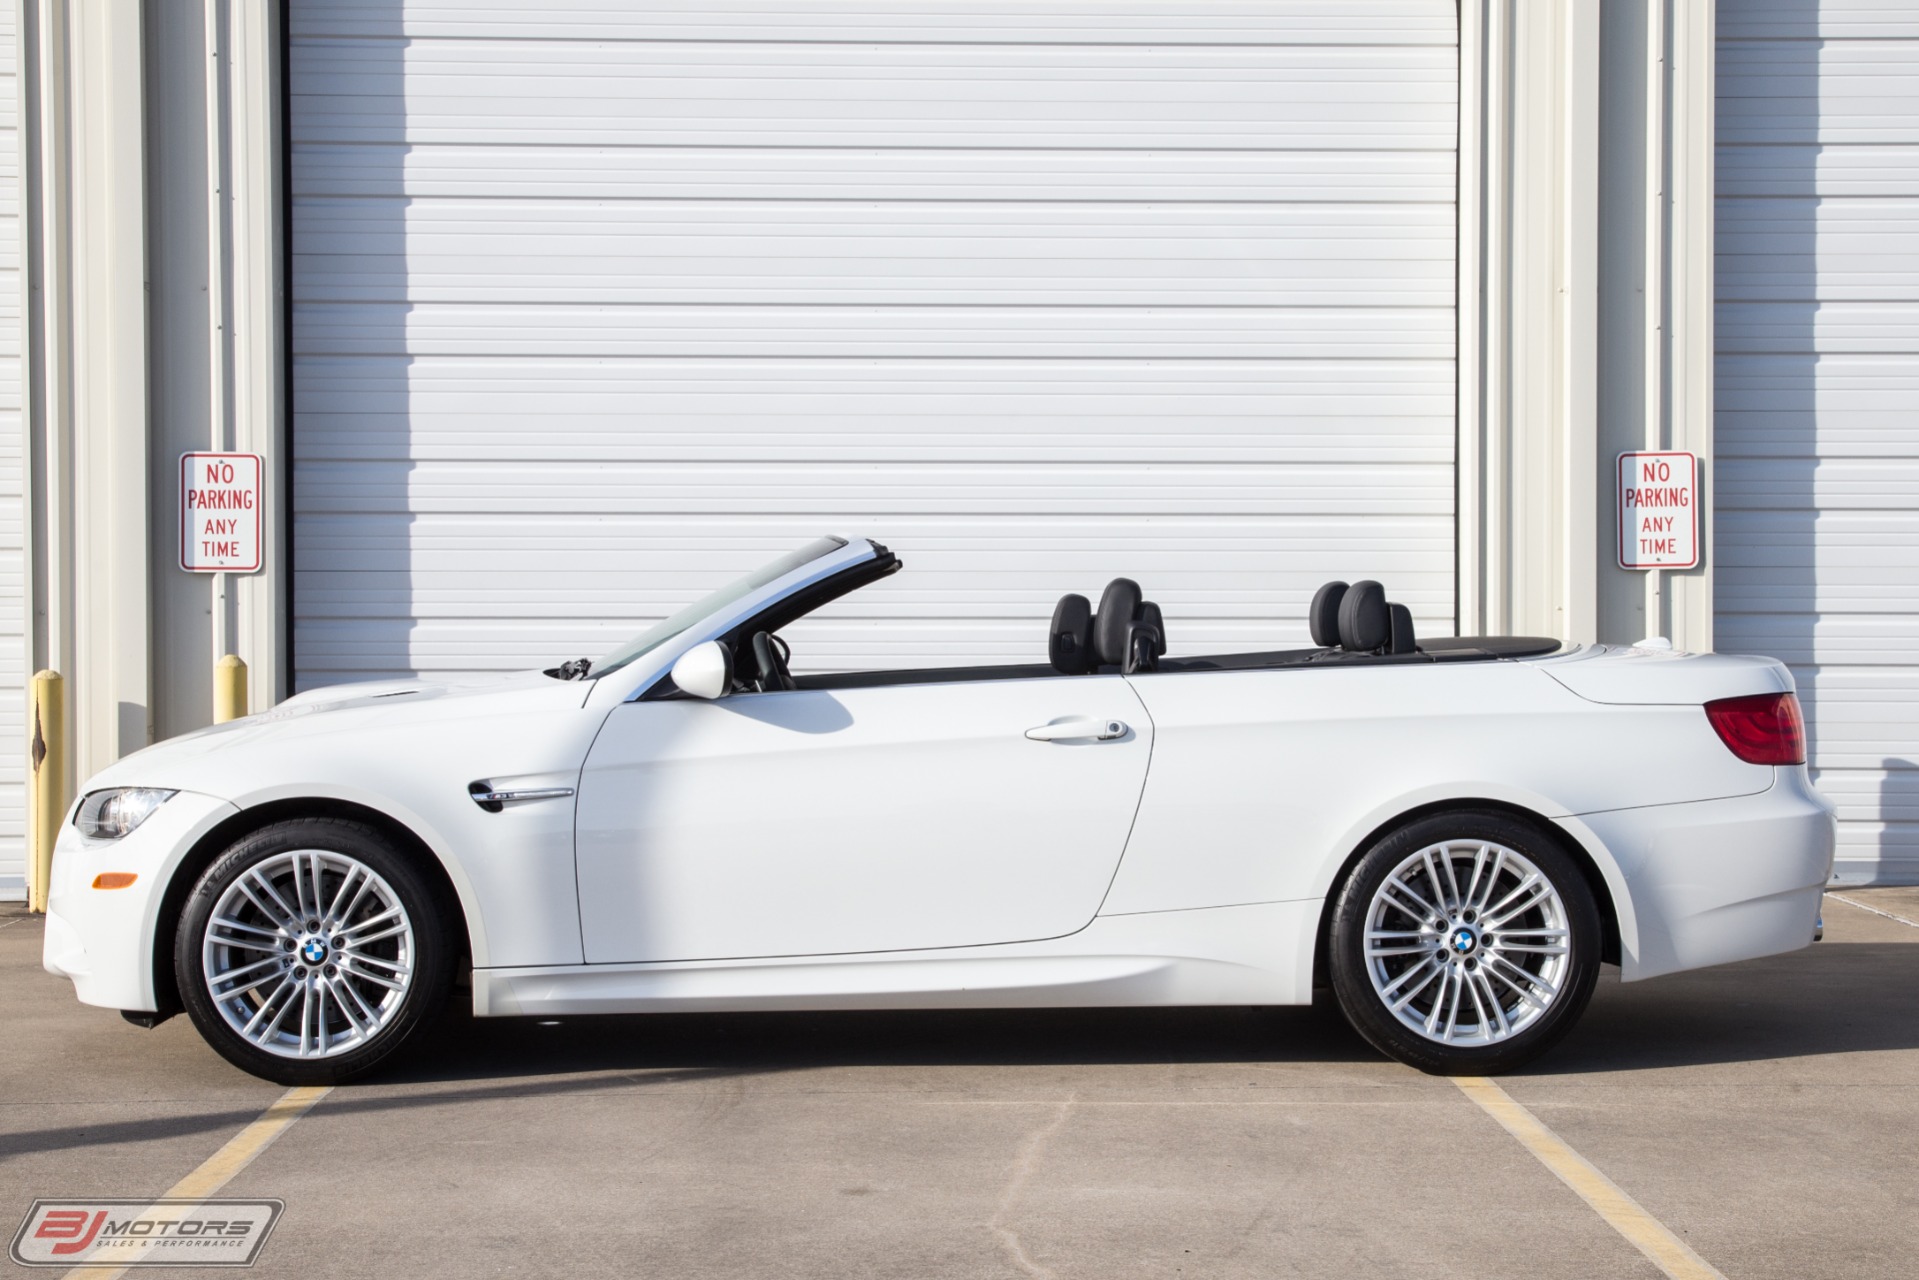 Used 2011 BMW M3 Convertible For Sale (Special Pricing) | BJ Motors